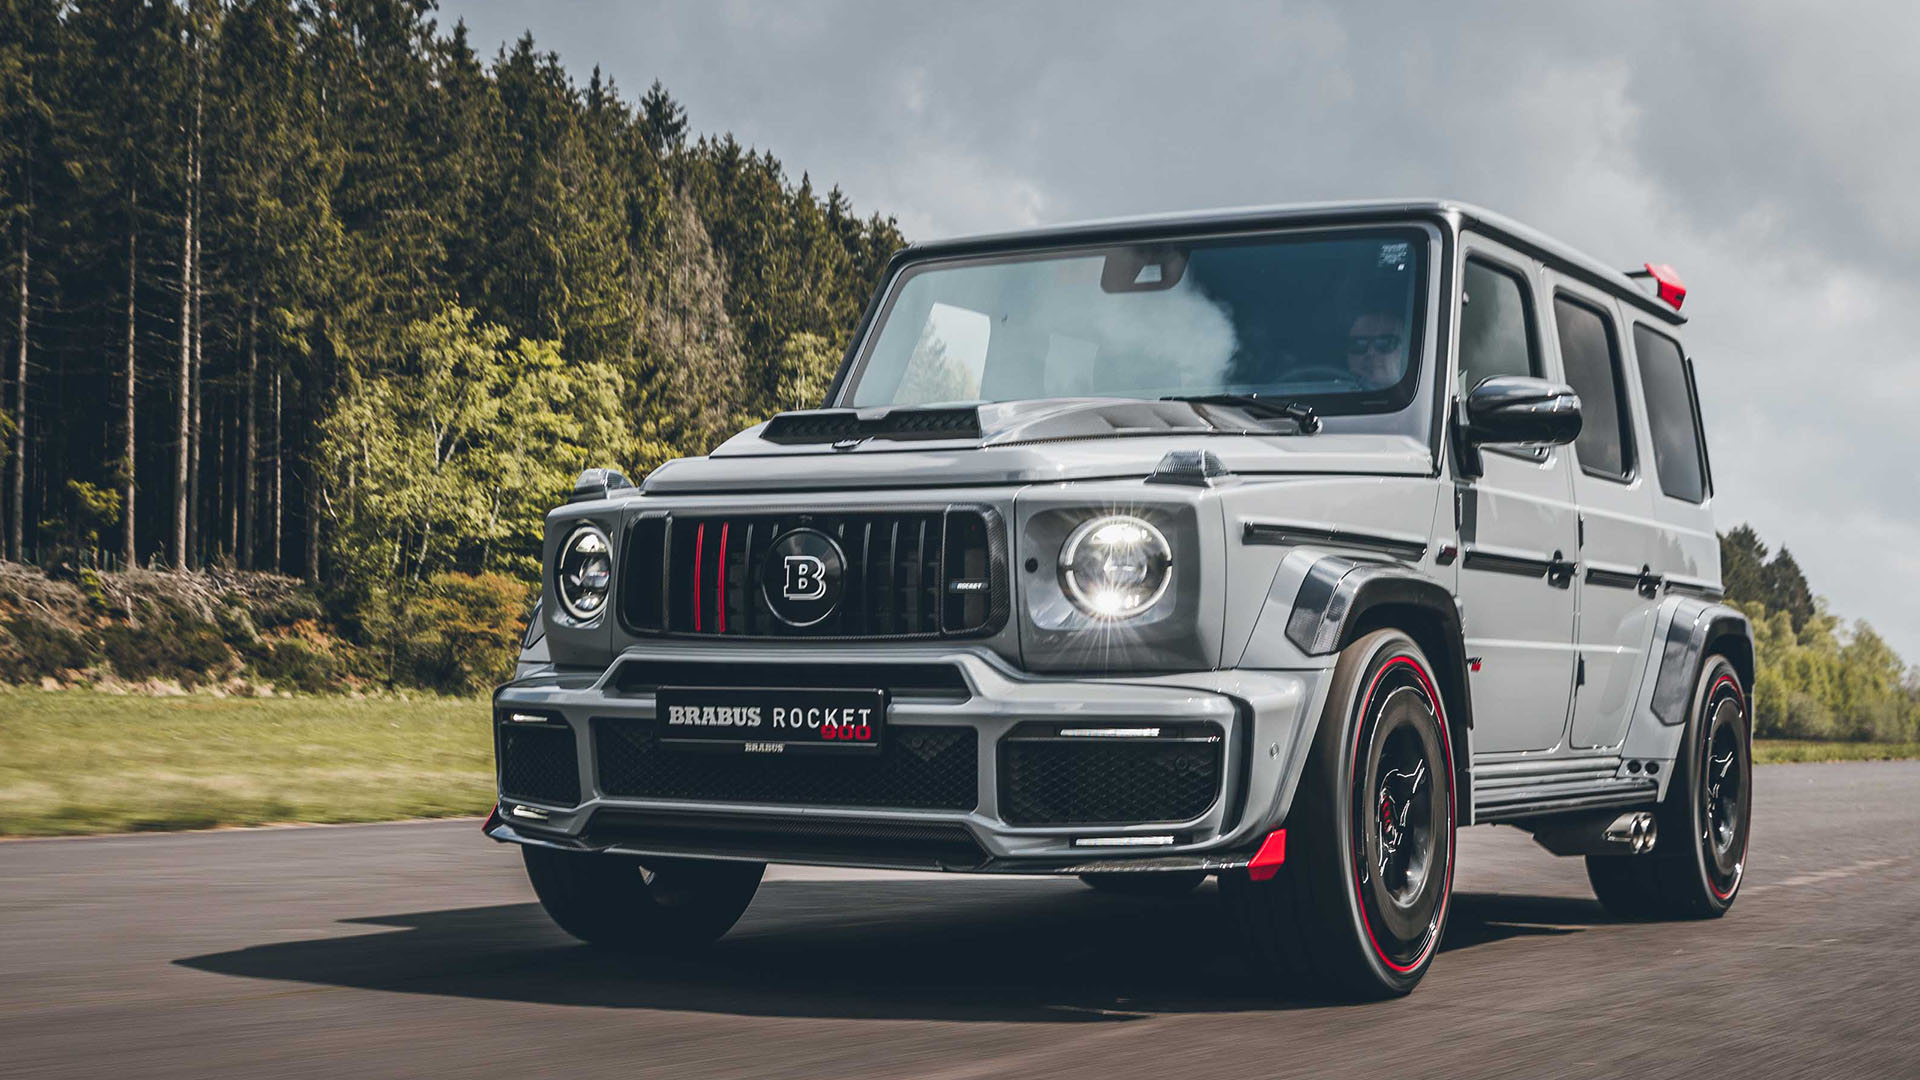 Brabus Rocket 900: A $600k G63 AMG Limited to 25 Cars Worldwide